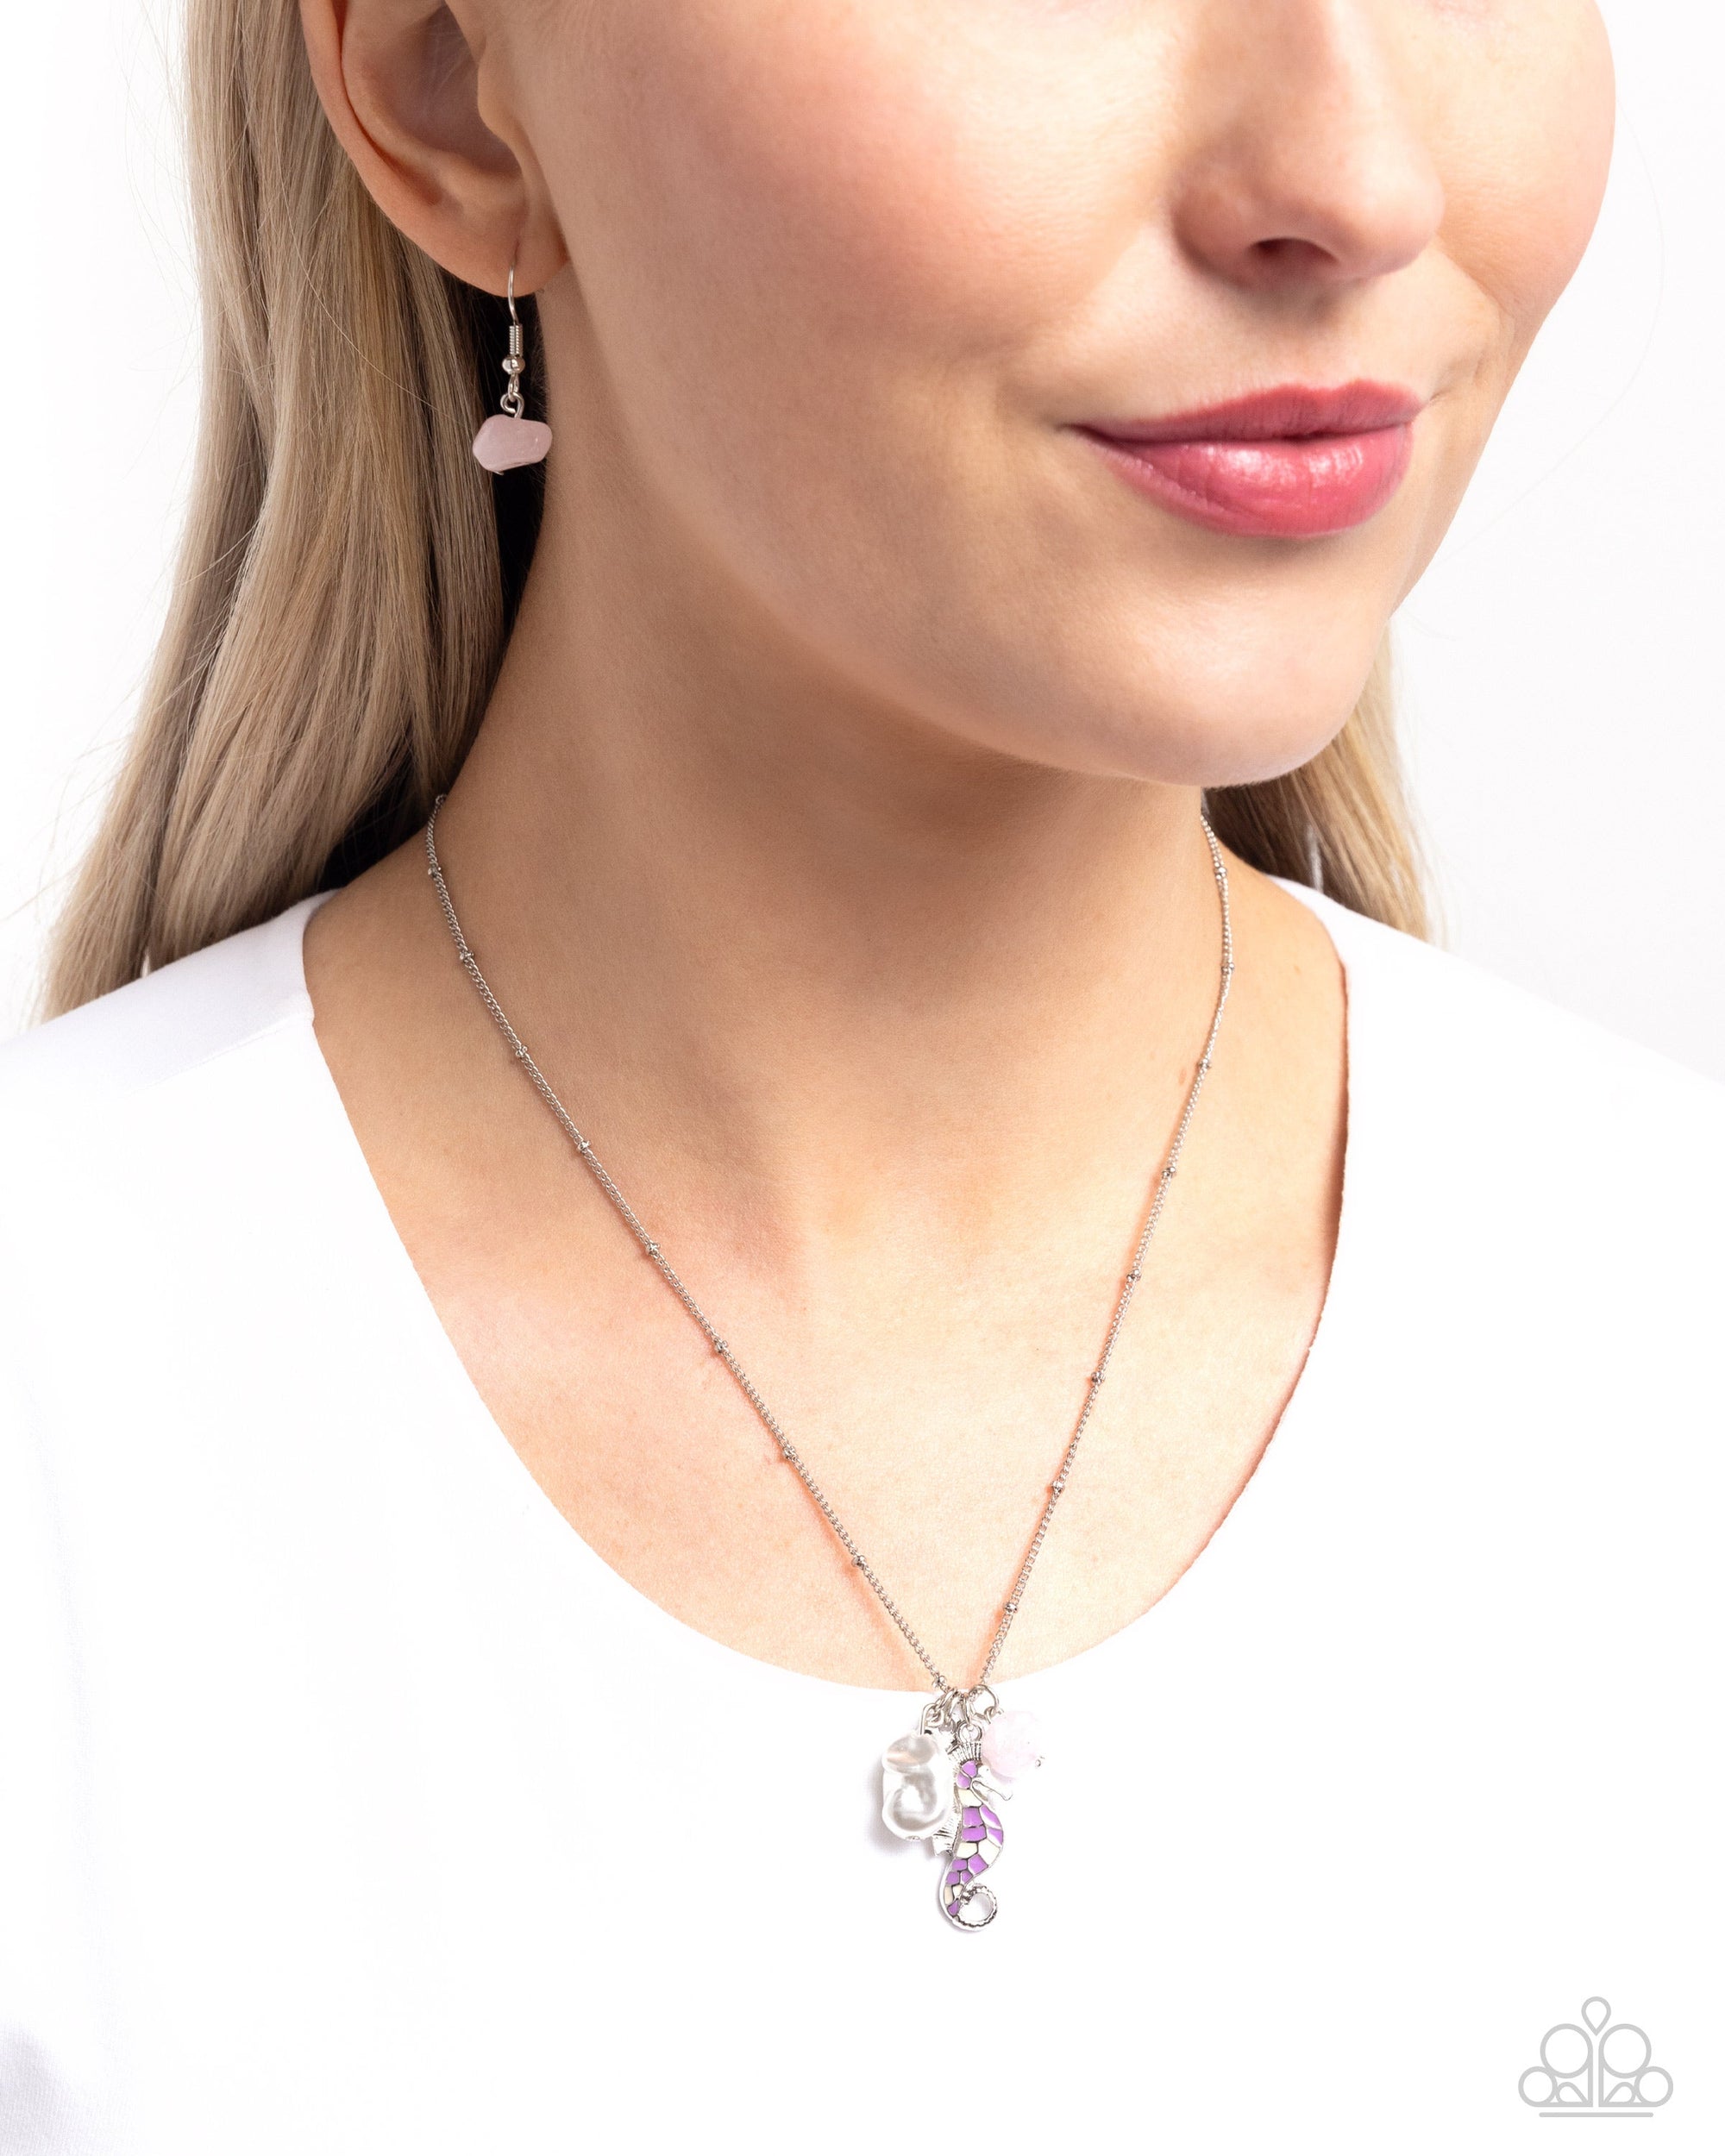 Seahorse Shimmer Purple Necklace - Paparazzi Accessories- lightbox - CarasShop.com - $5 Jewelry by Cara Jewels